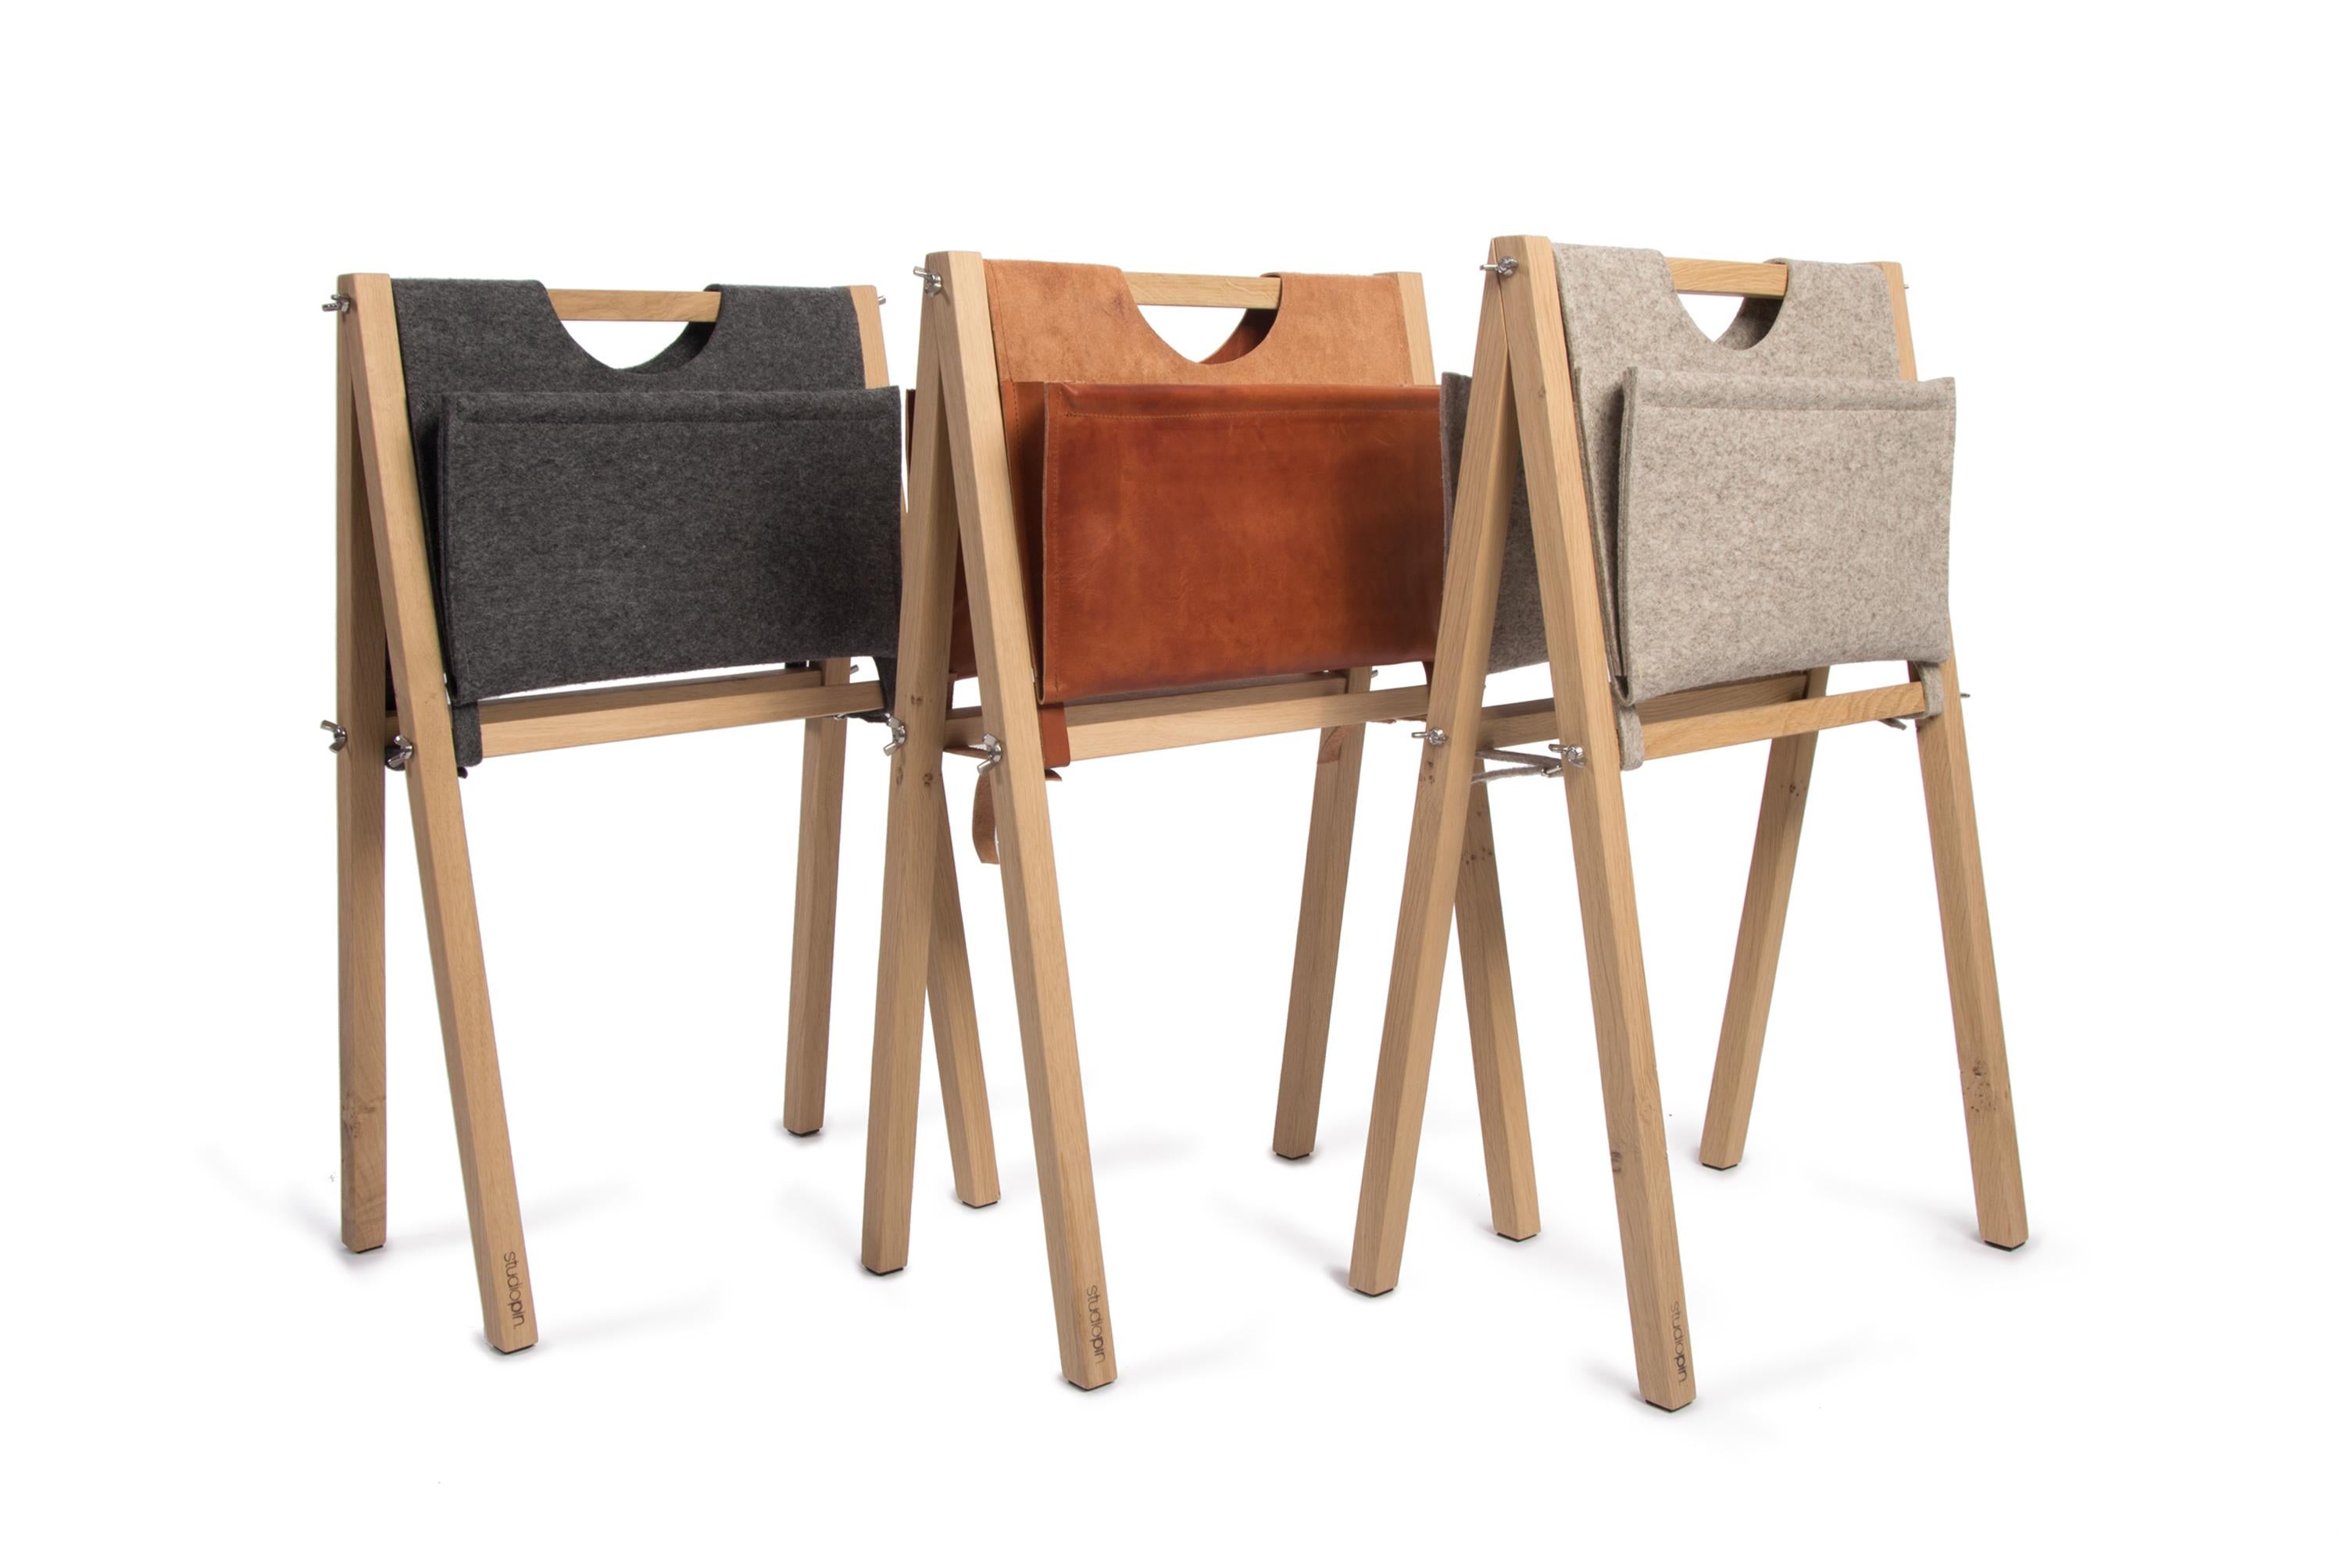 Set of 3 stan magazine rack by Studio Pin
Dimensions: W 42 x D 26 x H 67.2 cm
Materials: wool felt: light brown, dark grey; leather: brown, oak.

Stan is a magazine rack. The oak frame perfectly matches the 3 types of bags in the colors light